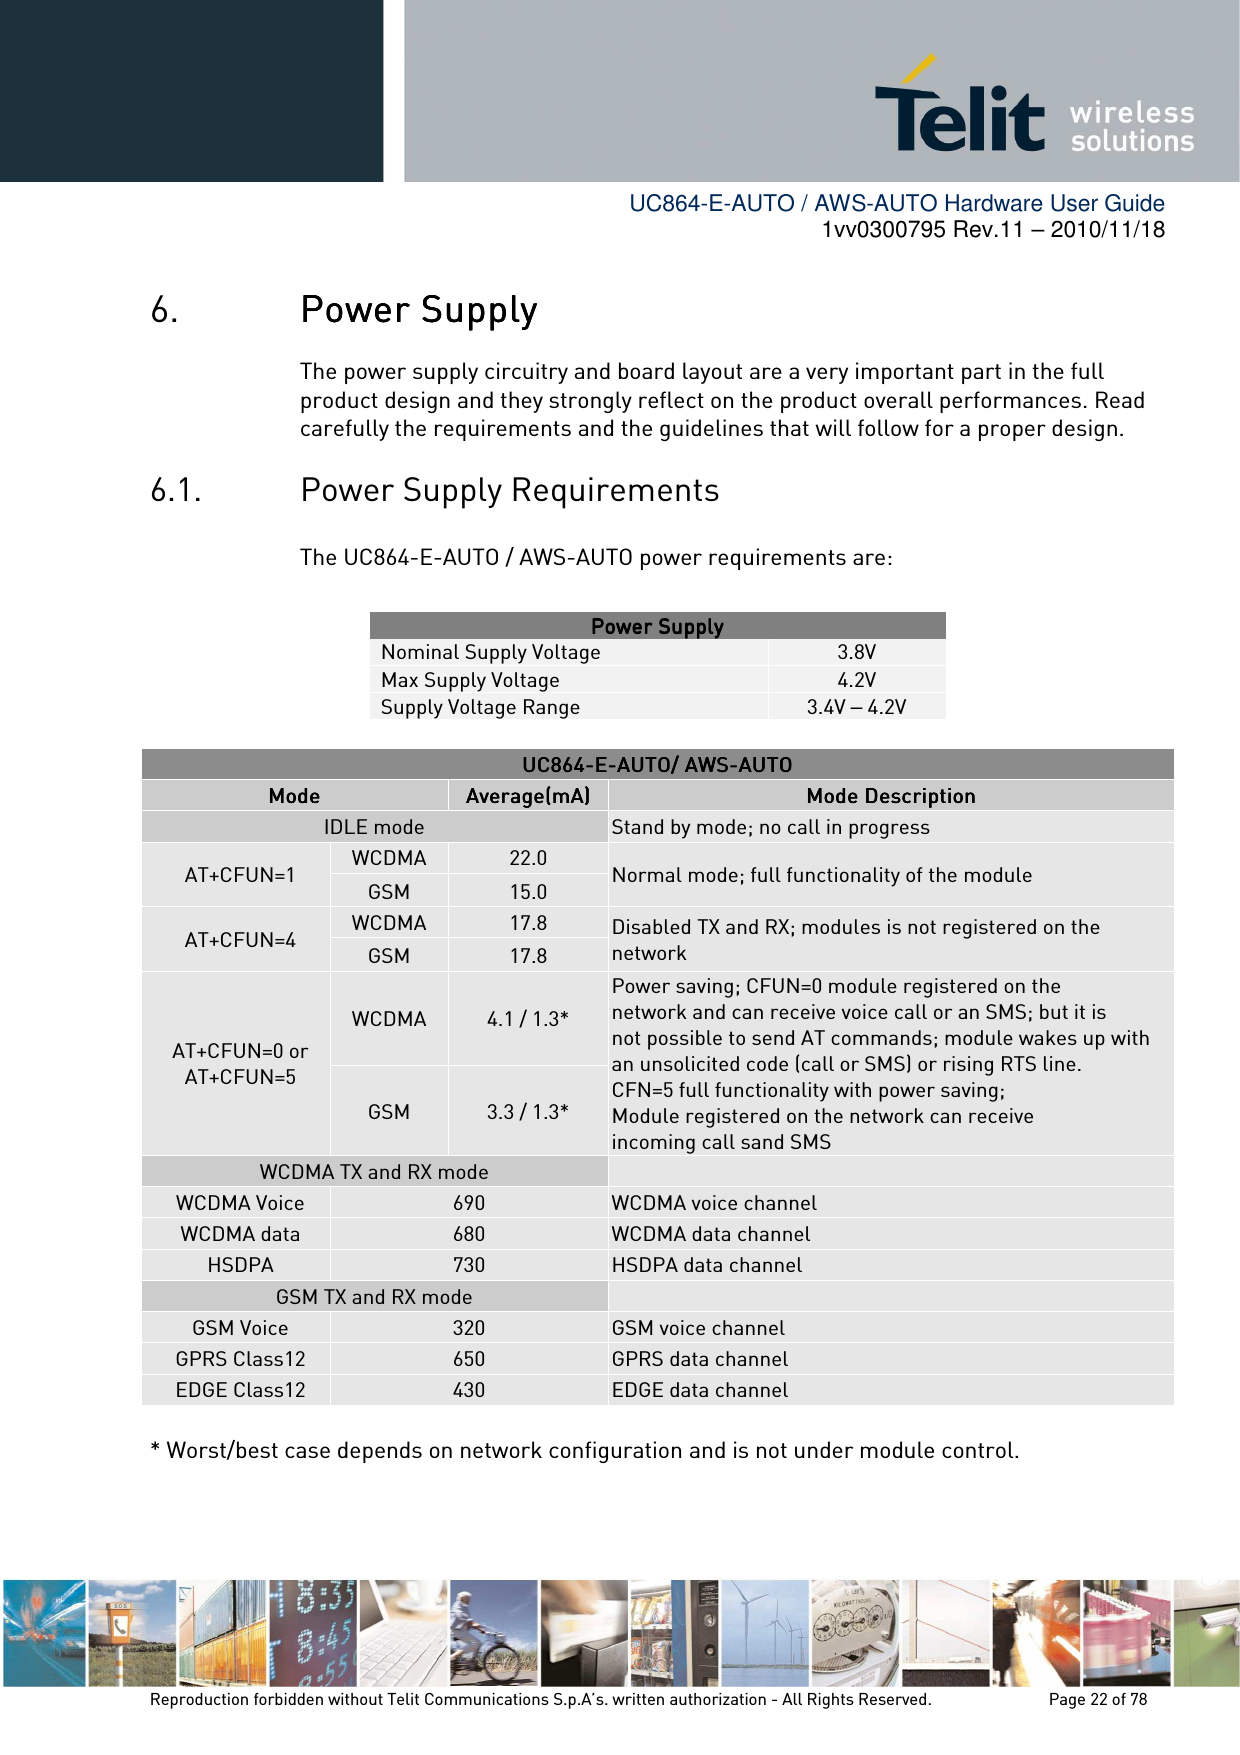        UC864-E-AUTO / AWS-AUTO Hardware User Guide 1vv0300795 Rev.11 – 2010/11/18     Reproduction forbidden without Telit Communications S.p.A’s. written authorization - All Rights Reserved.    Page 22 of 78  6. Power SupplyPower SupplyPower SupplyPower Supply    The power supply circuitry and board layout are a very important part in the full product design and they strongly reflect on the product overall performances. Read carefully the requirements and the guidelines that will follow for a proper design. 6.1. Power Supply Requirements The UC864-E-AUTO / AWS-AUTO power requirements are:  Power SupplyPower SupplyPower SupplyPower Supply    Nominal Supply Voltage  3.8V Max Supply Voltage  4.2V Supply Voltage Range  3.4V – 4.2V  UC864UC864UC864UC864----EEEE----AUTOAUTOAUTOAUTO/ AWS/ AWS/ AWS/ AWS----AUTOAUTOAUTOAUTO    ModeModeModeMode     Average(mA)Average(mA)Average(mA)Average(mA)     Mode DMode DMode DMode Descriptionescriptionescriptionescription    IDLE mode  Stand by mode; no call in progress AT+CFUN=1  WCDMA  22.0  Normal mode; full functionality of the module GSM  15.0 AT+CFUN=4  WCDMA  17.8  Disabled TX and RX; modules is not registered on the network GSM  17.8 AT+CFUN=0 or AT+CFUN=5 WCDMA  4.1 / 1.3* Power saving; CFUN=0 module registered on the network and can receive voice call or an SMS; but it is not possible to send AT commands; module wakes up with an unsolicited code (call or SMS) or rising RTS line. CFN=5 full functionality with power saving; Module registered on the network can receive  incoming call sand SMS GSM  3.3 / 1.3* WCDMA TX and RX mode   WCDMA Voice  690  WCDMA voice channel WCDMA data  680  WCDMA data channel HSDPA  730  HSDPA data channel GSM TX and RX mode   GSM Voice  320  GSM voice channel GPRS Class12  650  GPRS data channel EDGE Class12  430  EDGE data channel  * Worst/best case depends on network configuration and is not under module control.  